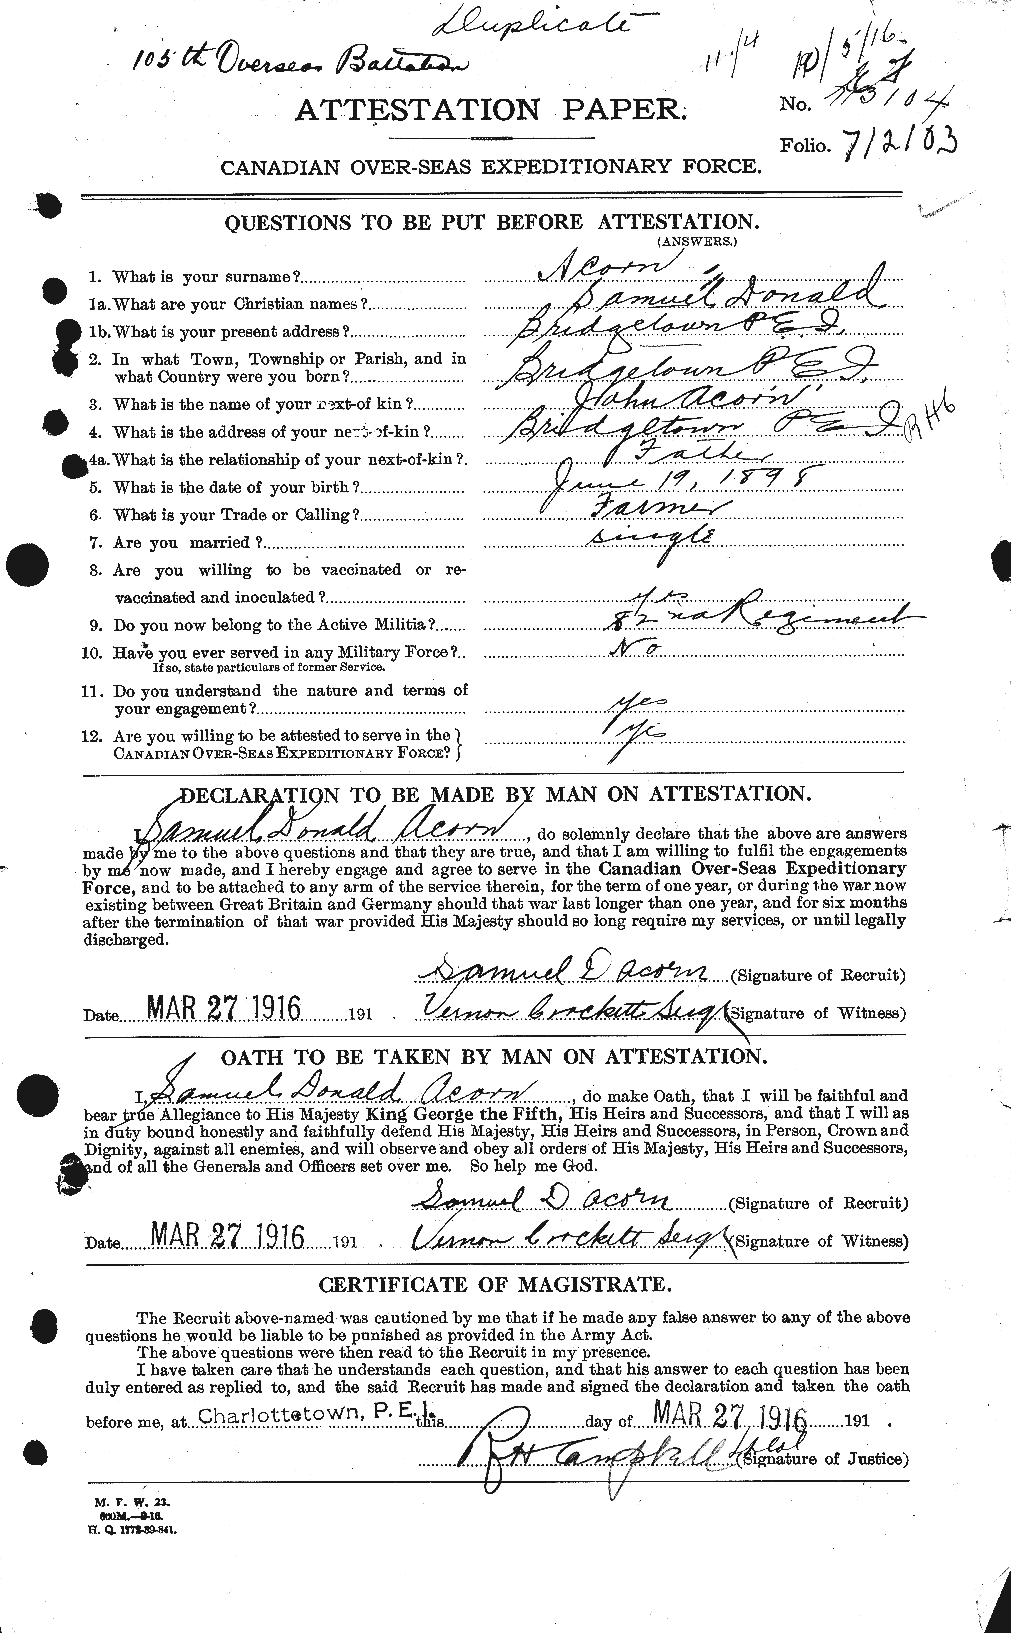 Personnel Records of the First World War - CEF 200855a